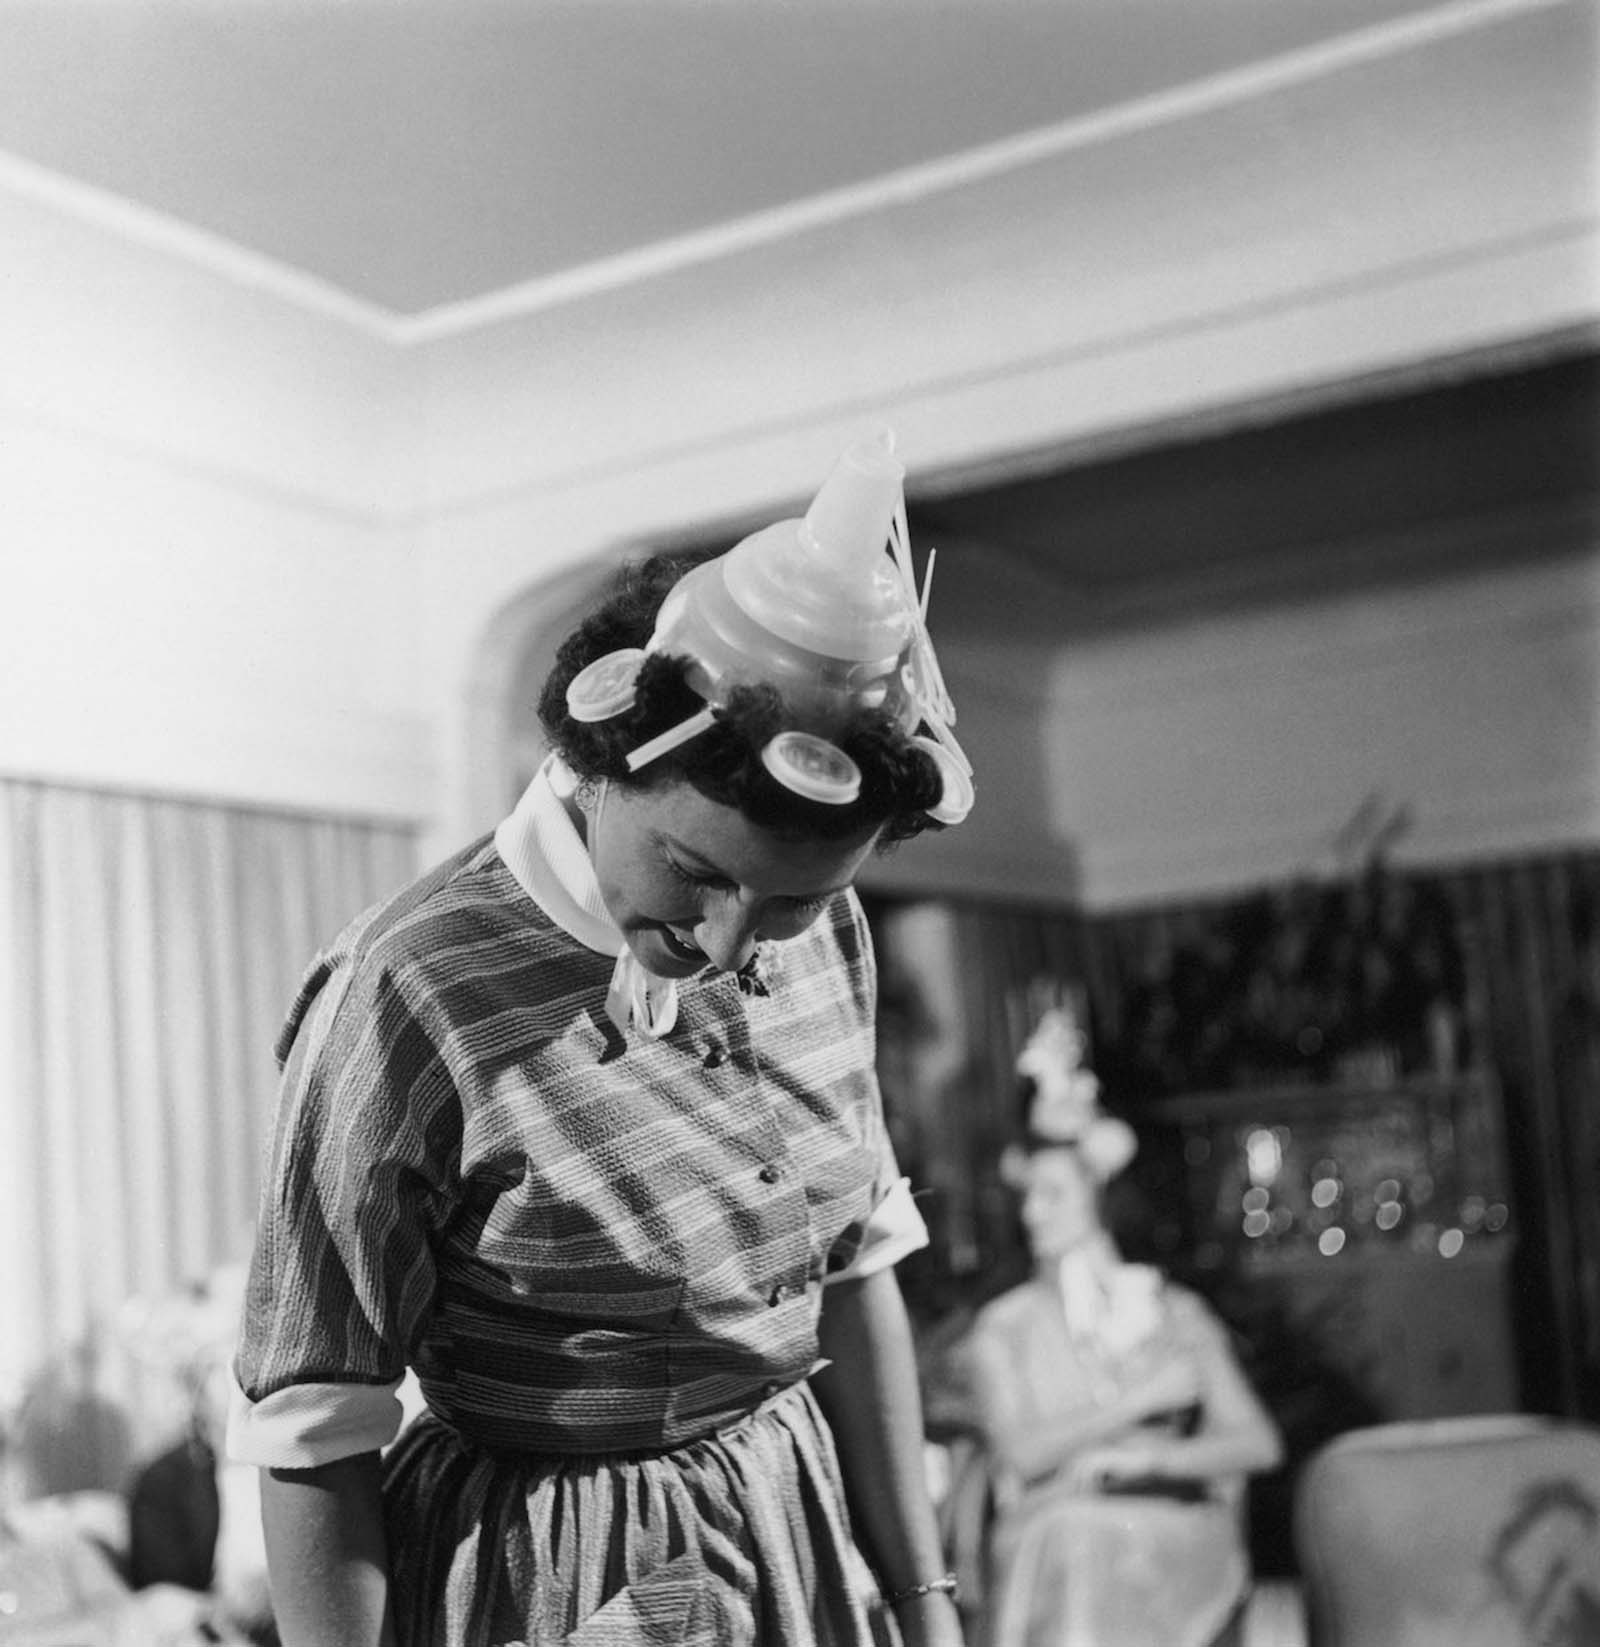 A suitably attired woman attends a Tupperware party. 1955.